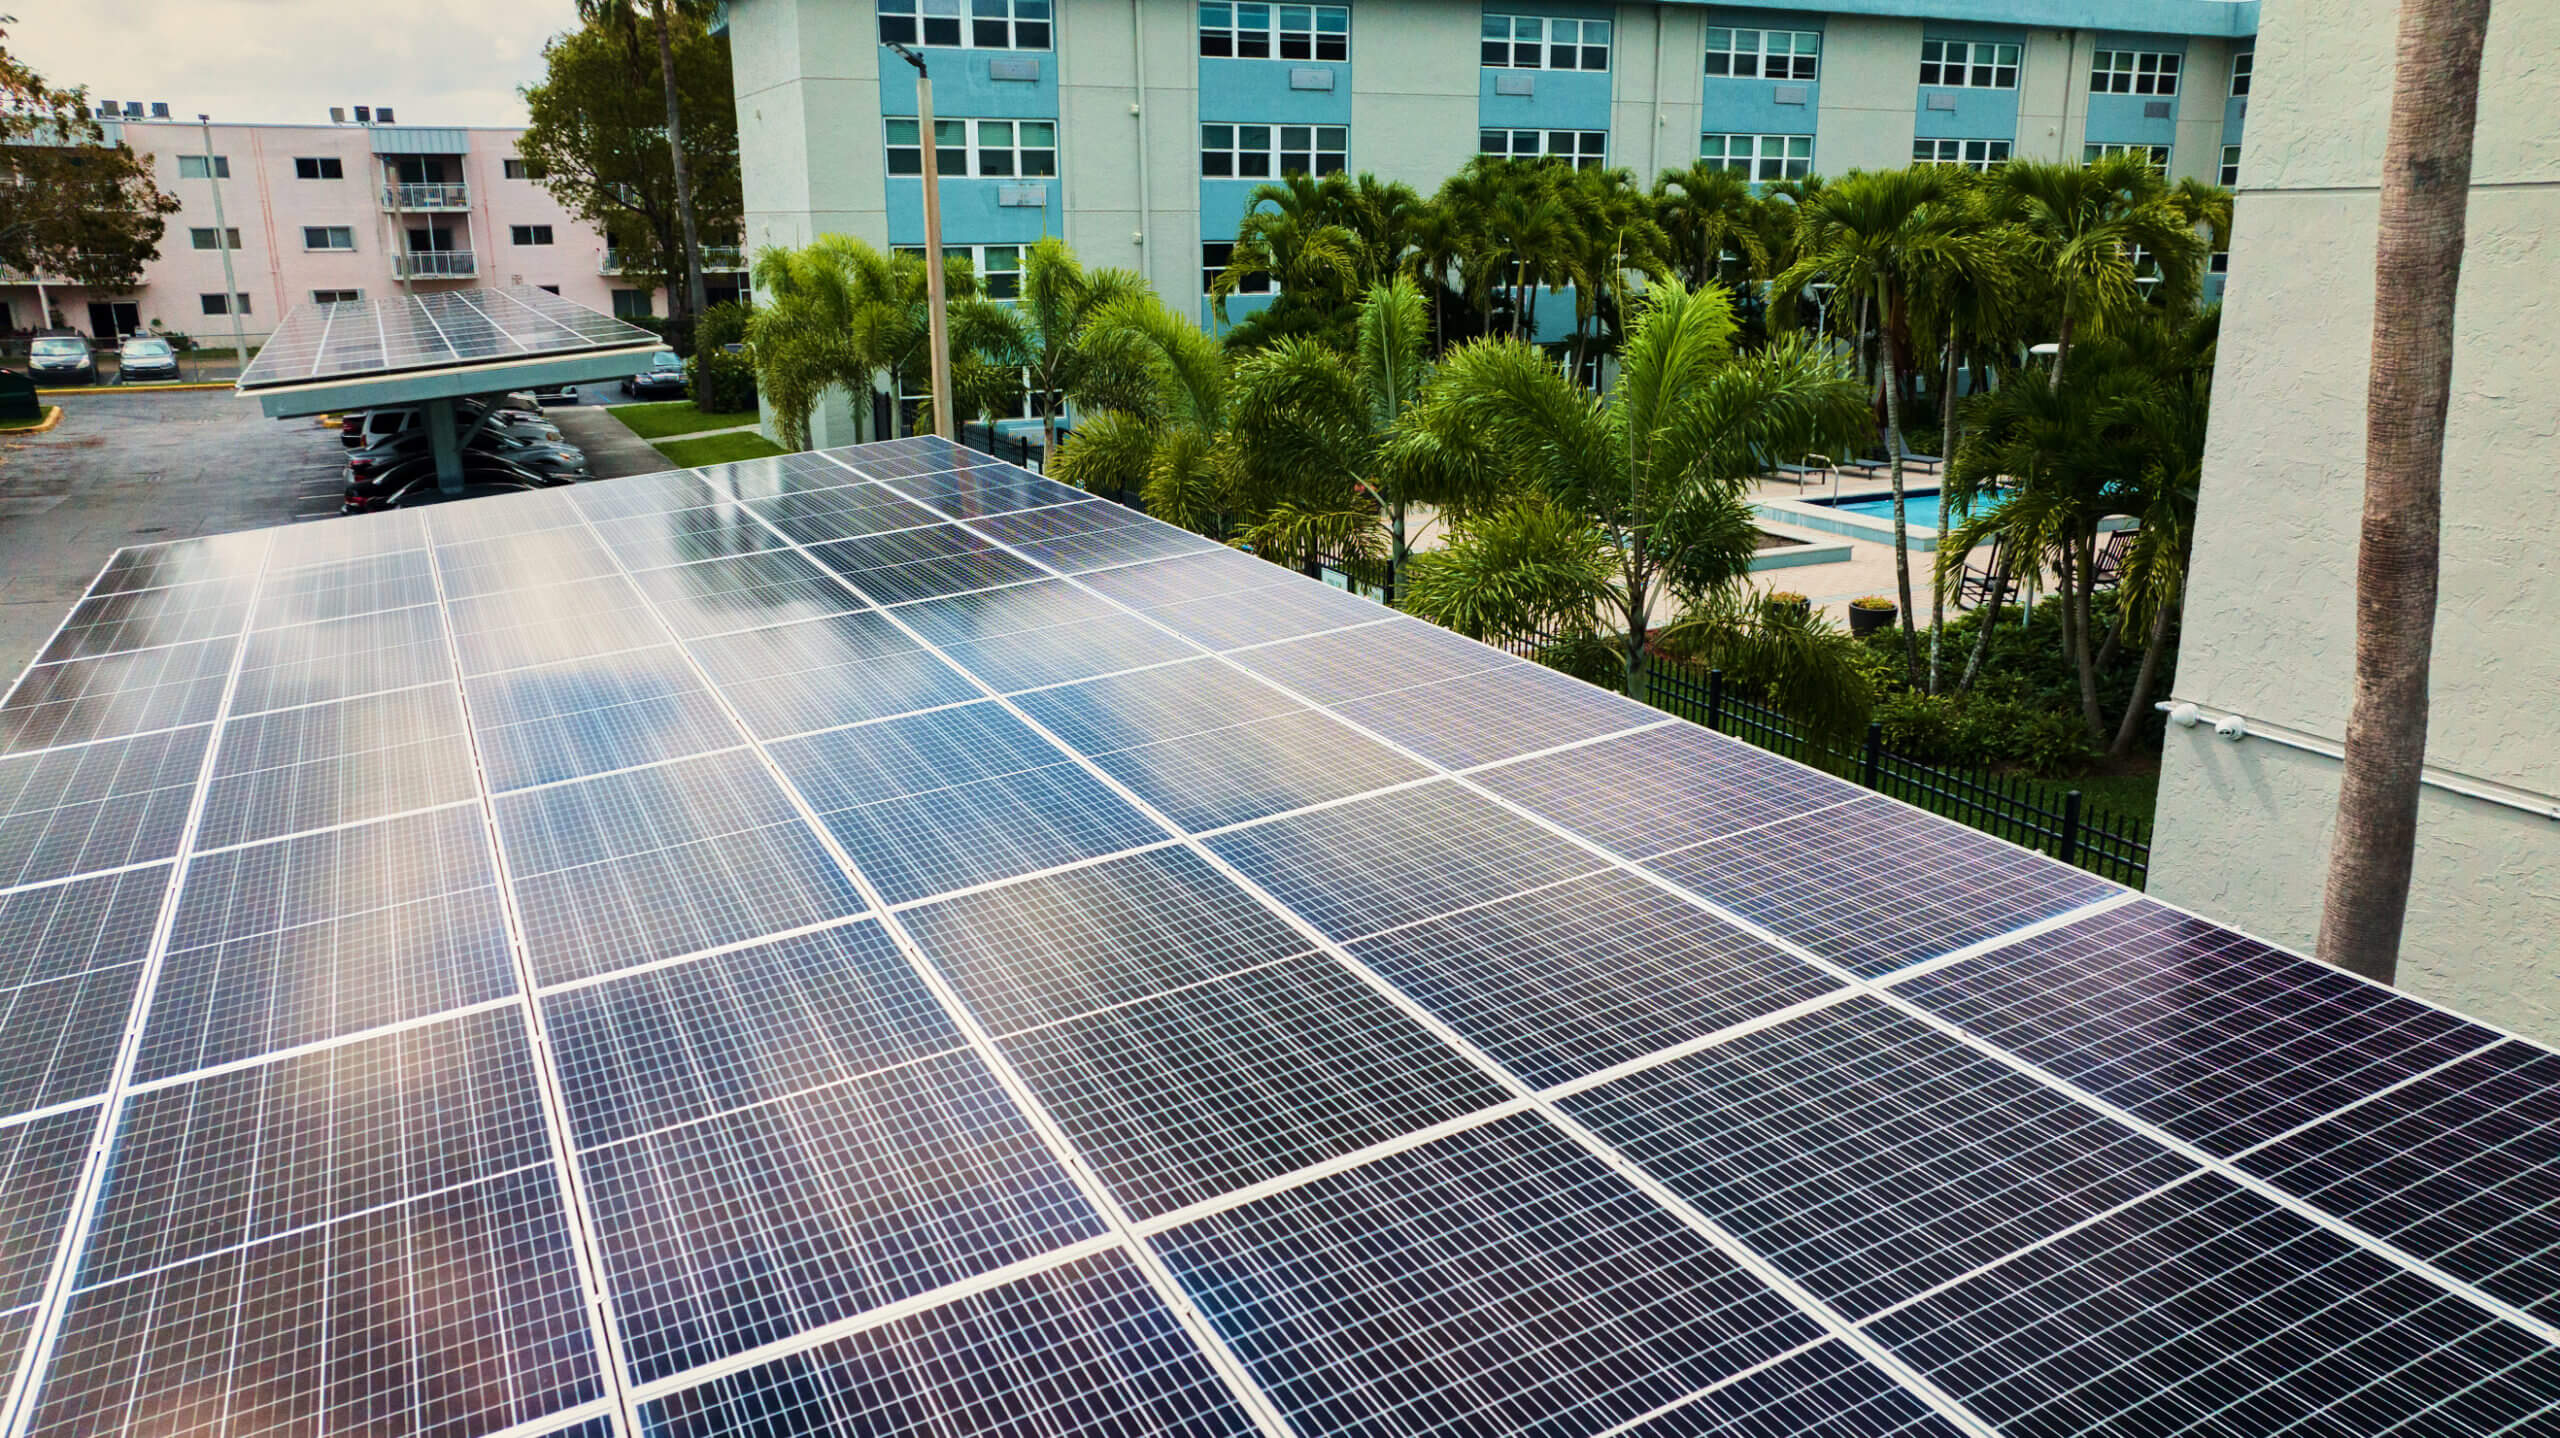 Efficient companies solar systems for a greener future